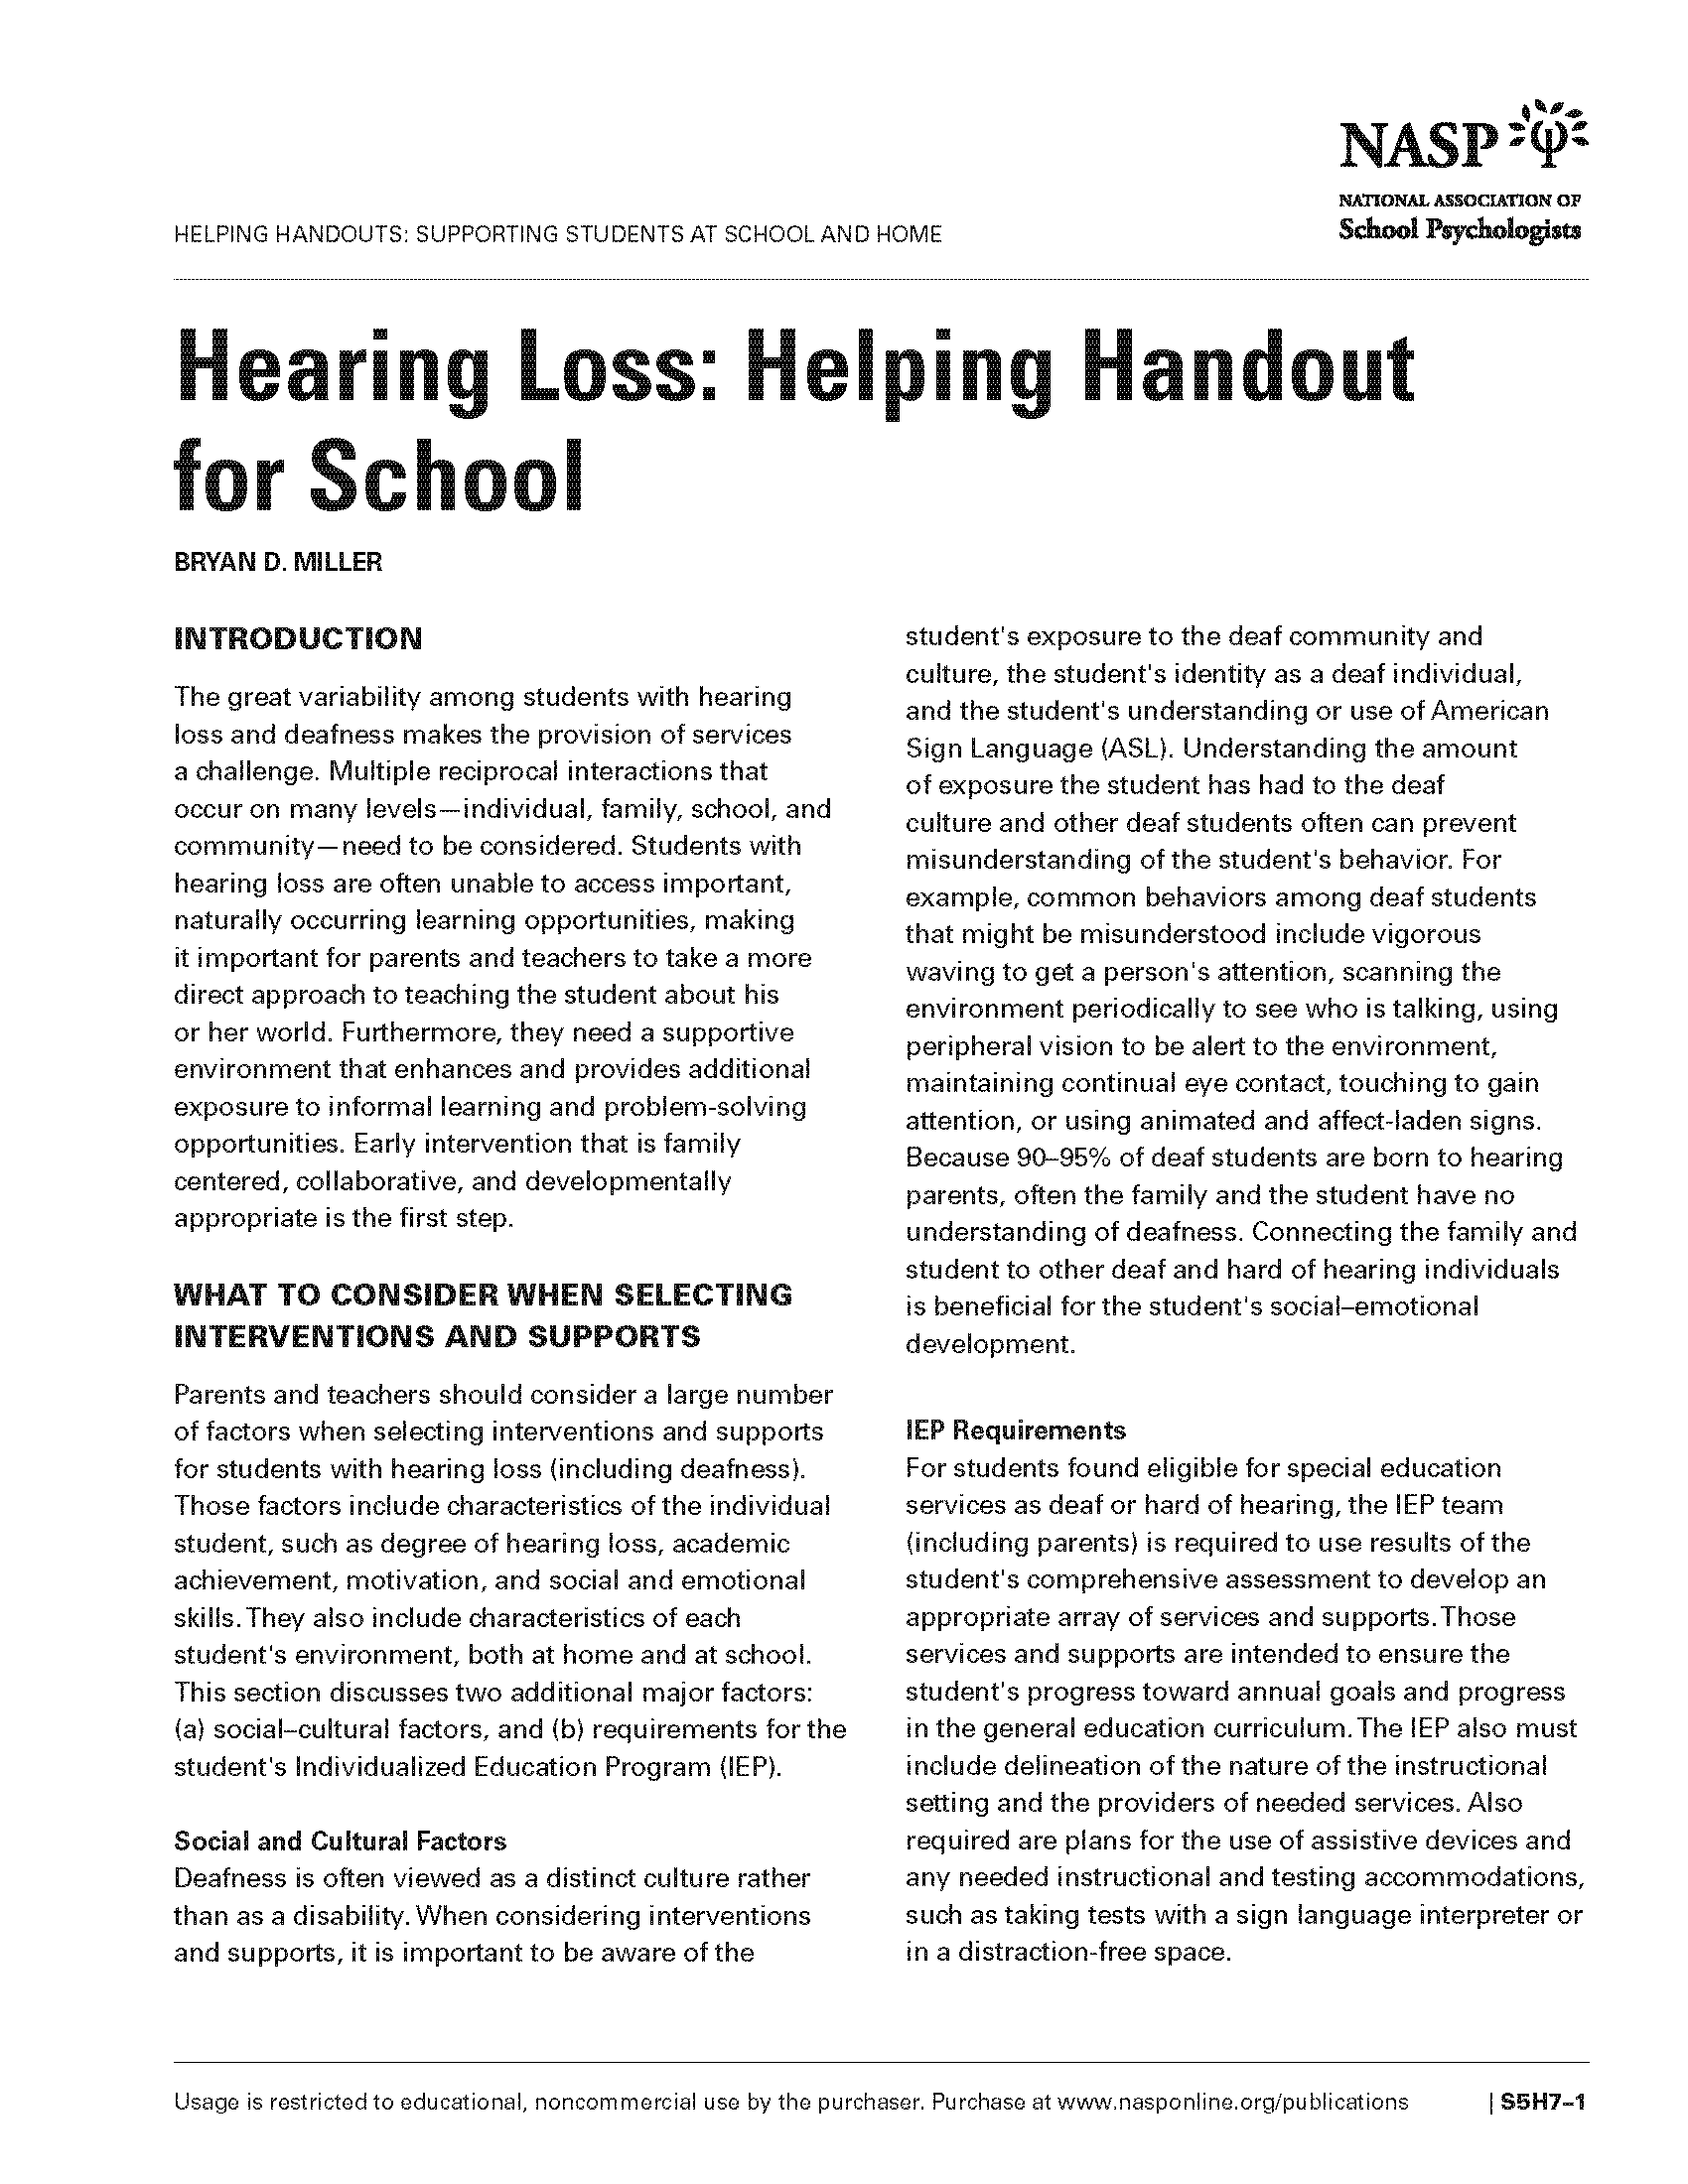 Hearing Loss: Helping Handout for School